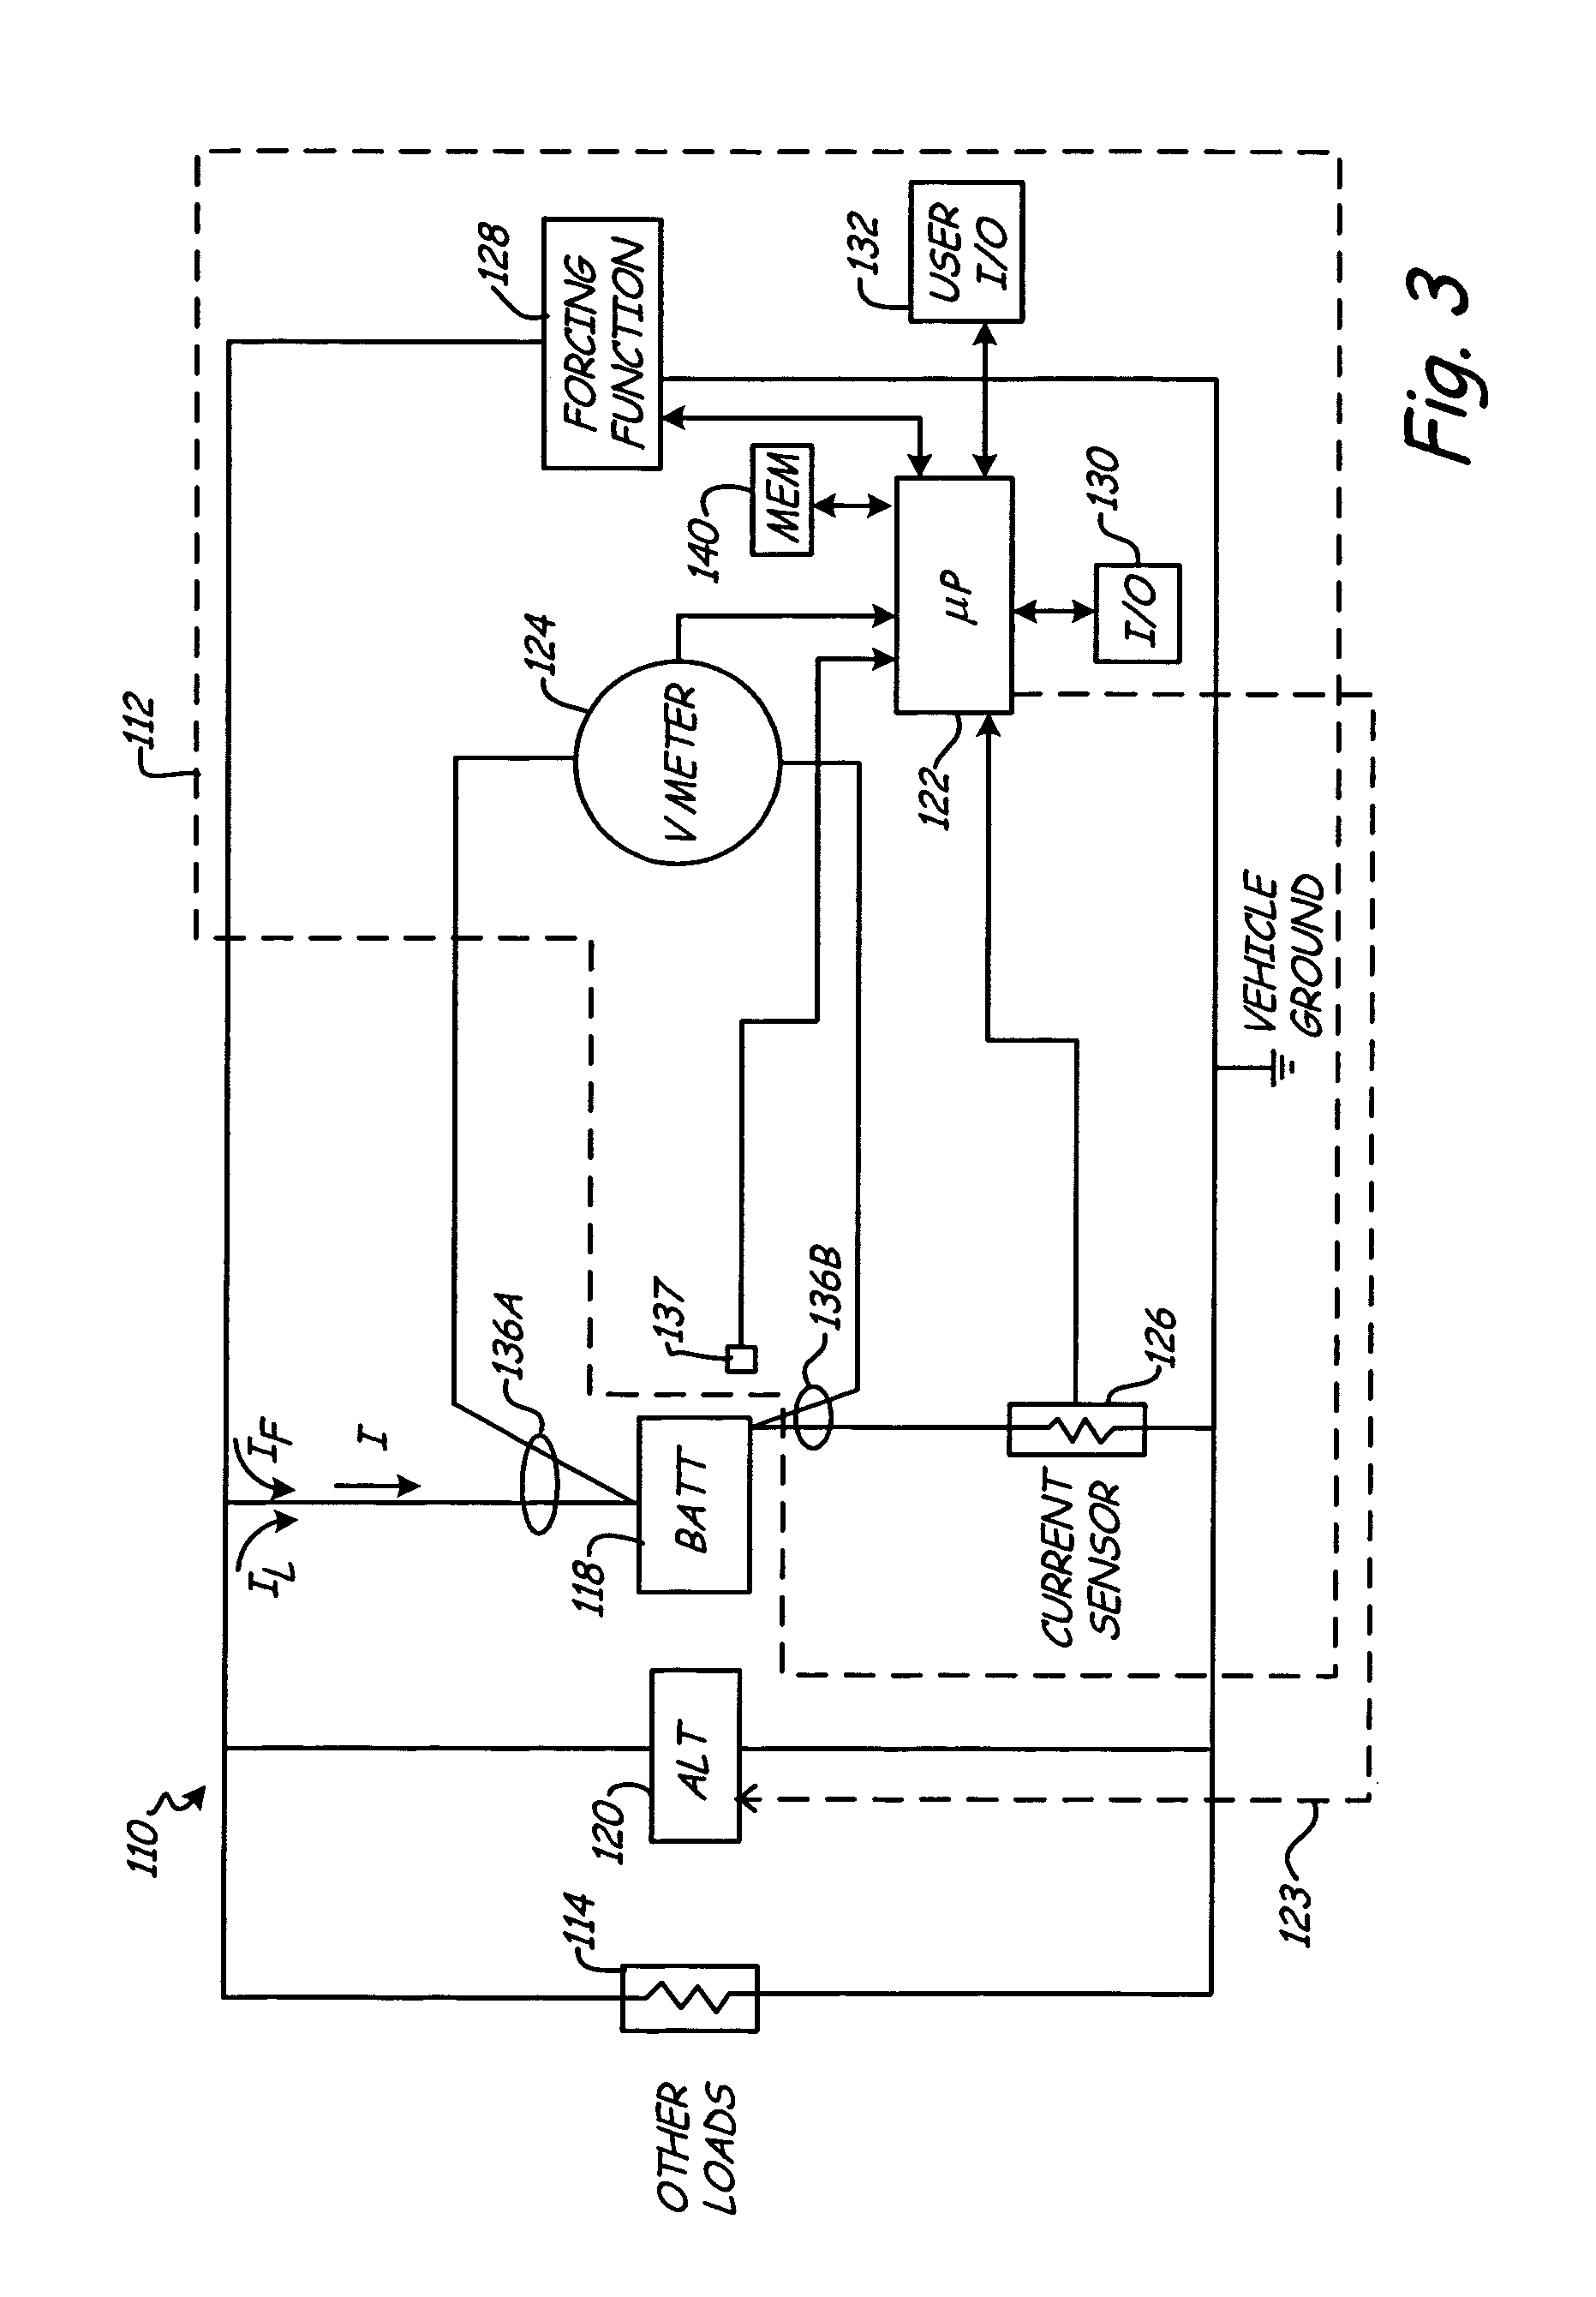 Battery tester capable of predicting a discharge voltage/discharge current of a battery